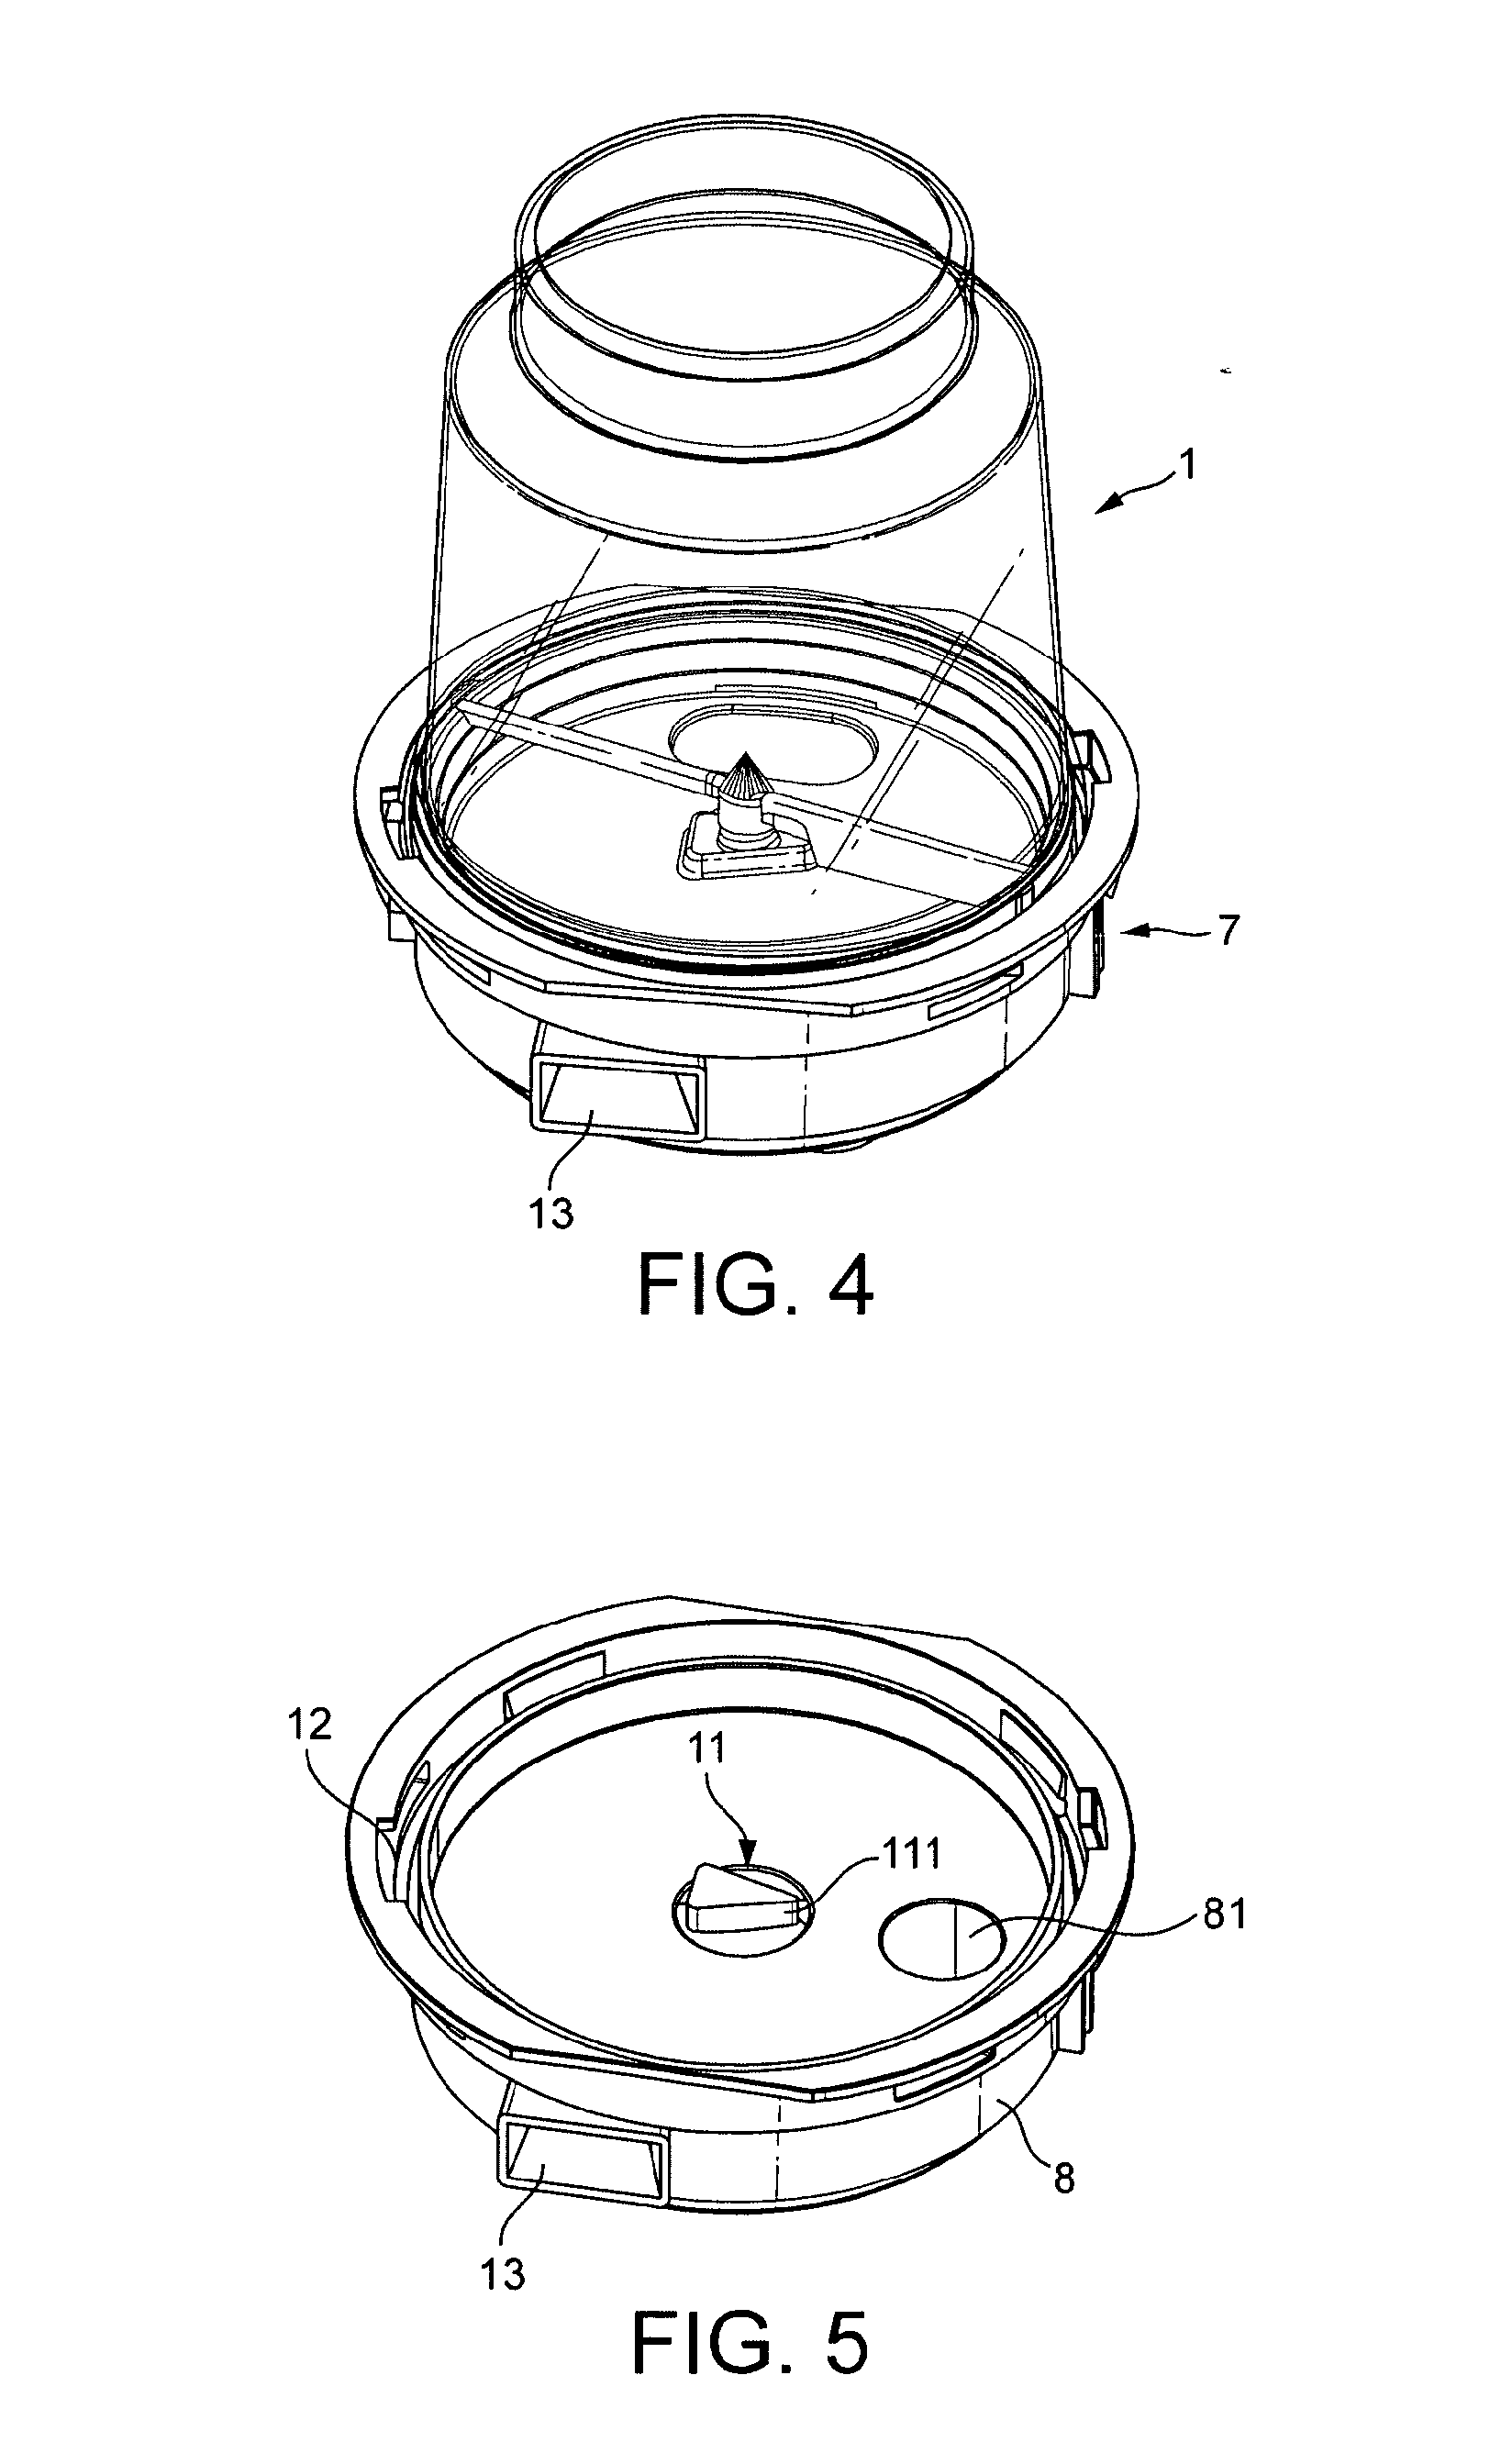 System of a container for storing and dispensing a product and a machine for dosing the product